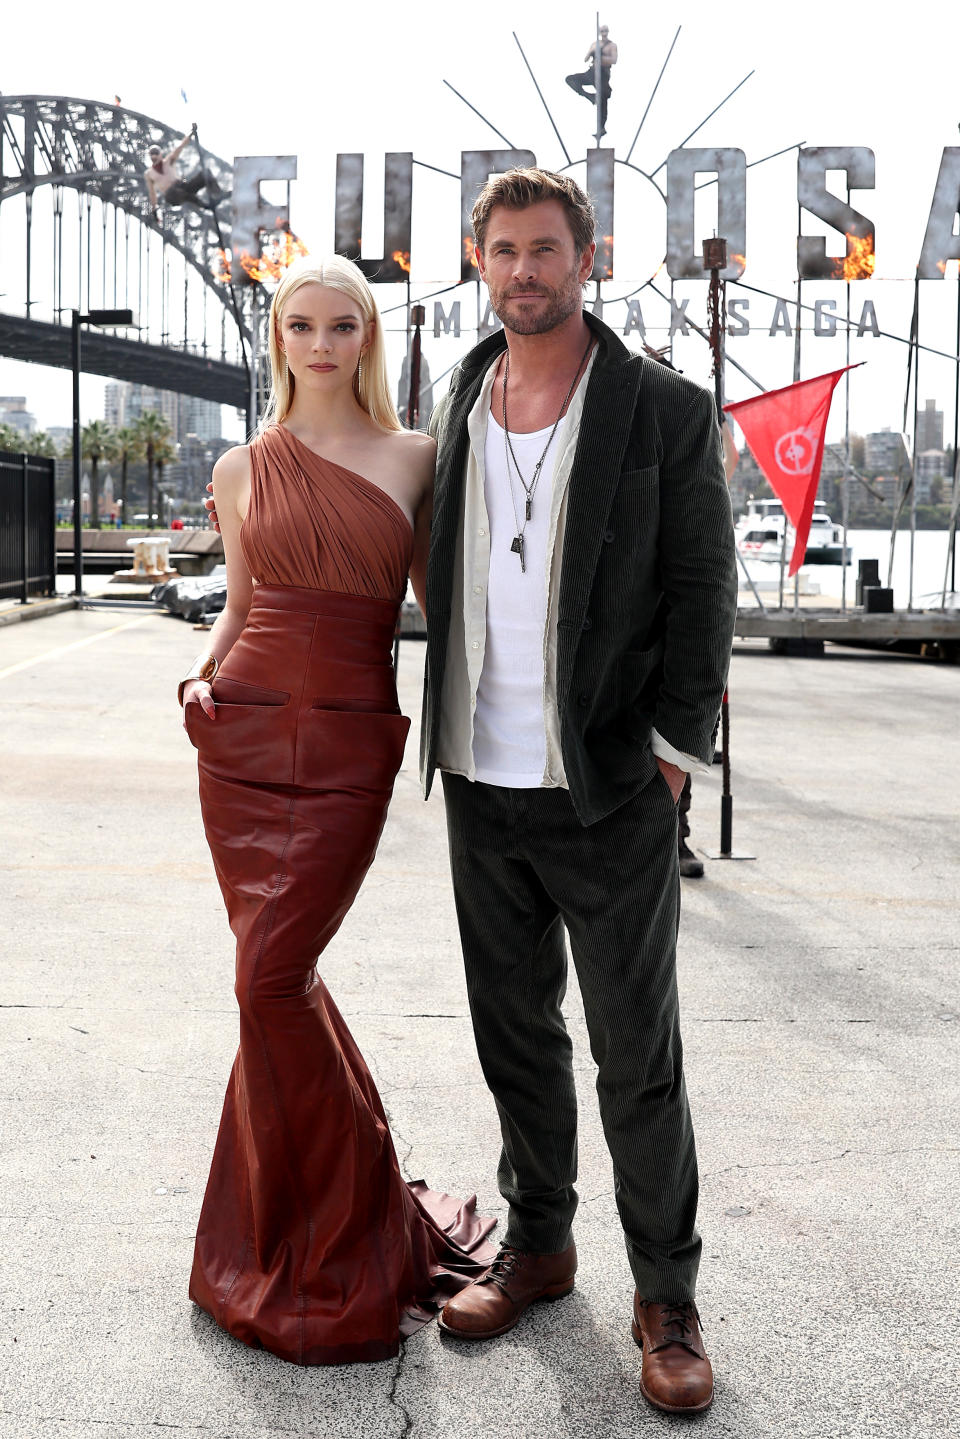 Anya Taylor-Joy stands next to Chris Hemsworth as they pose for a photo shoot.